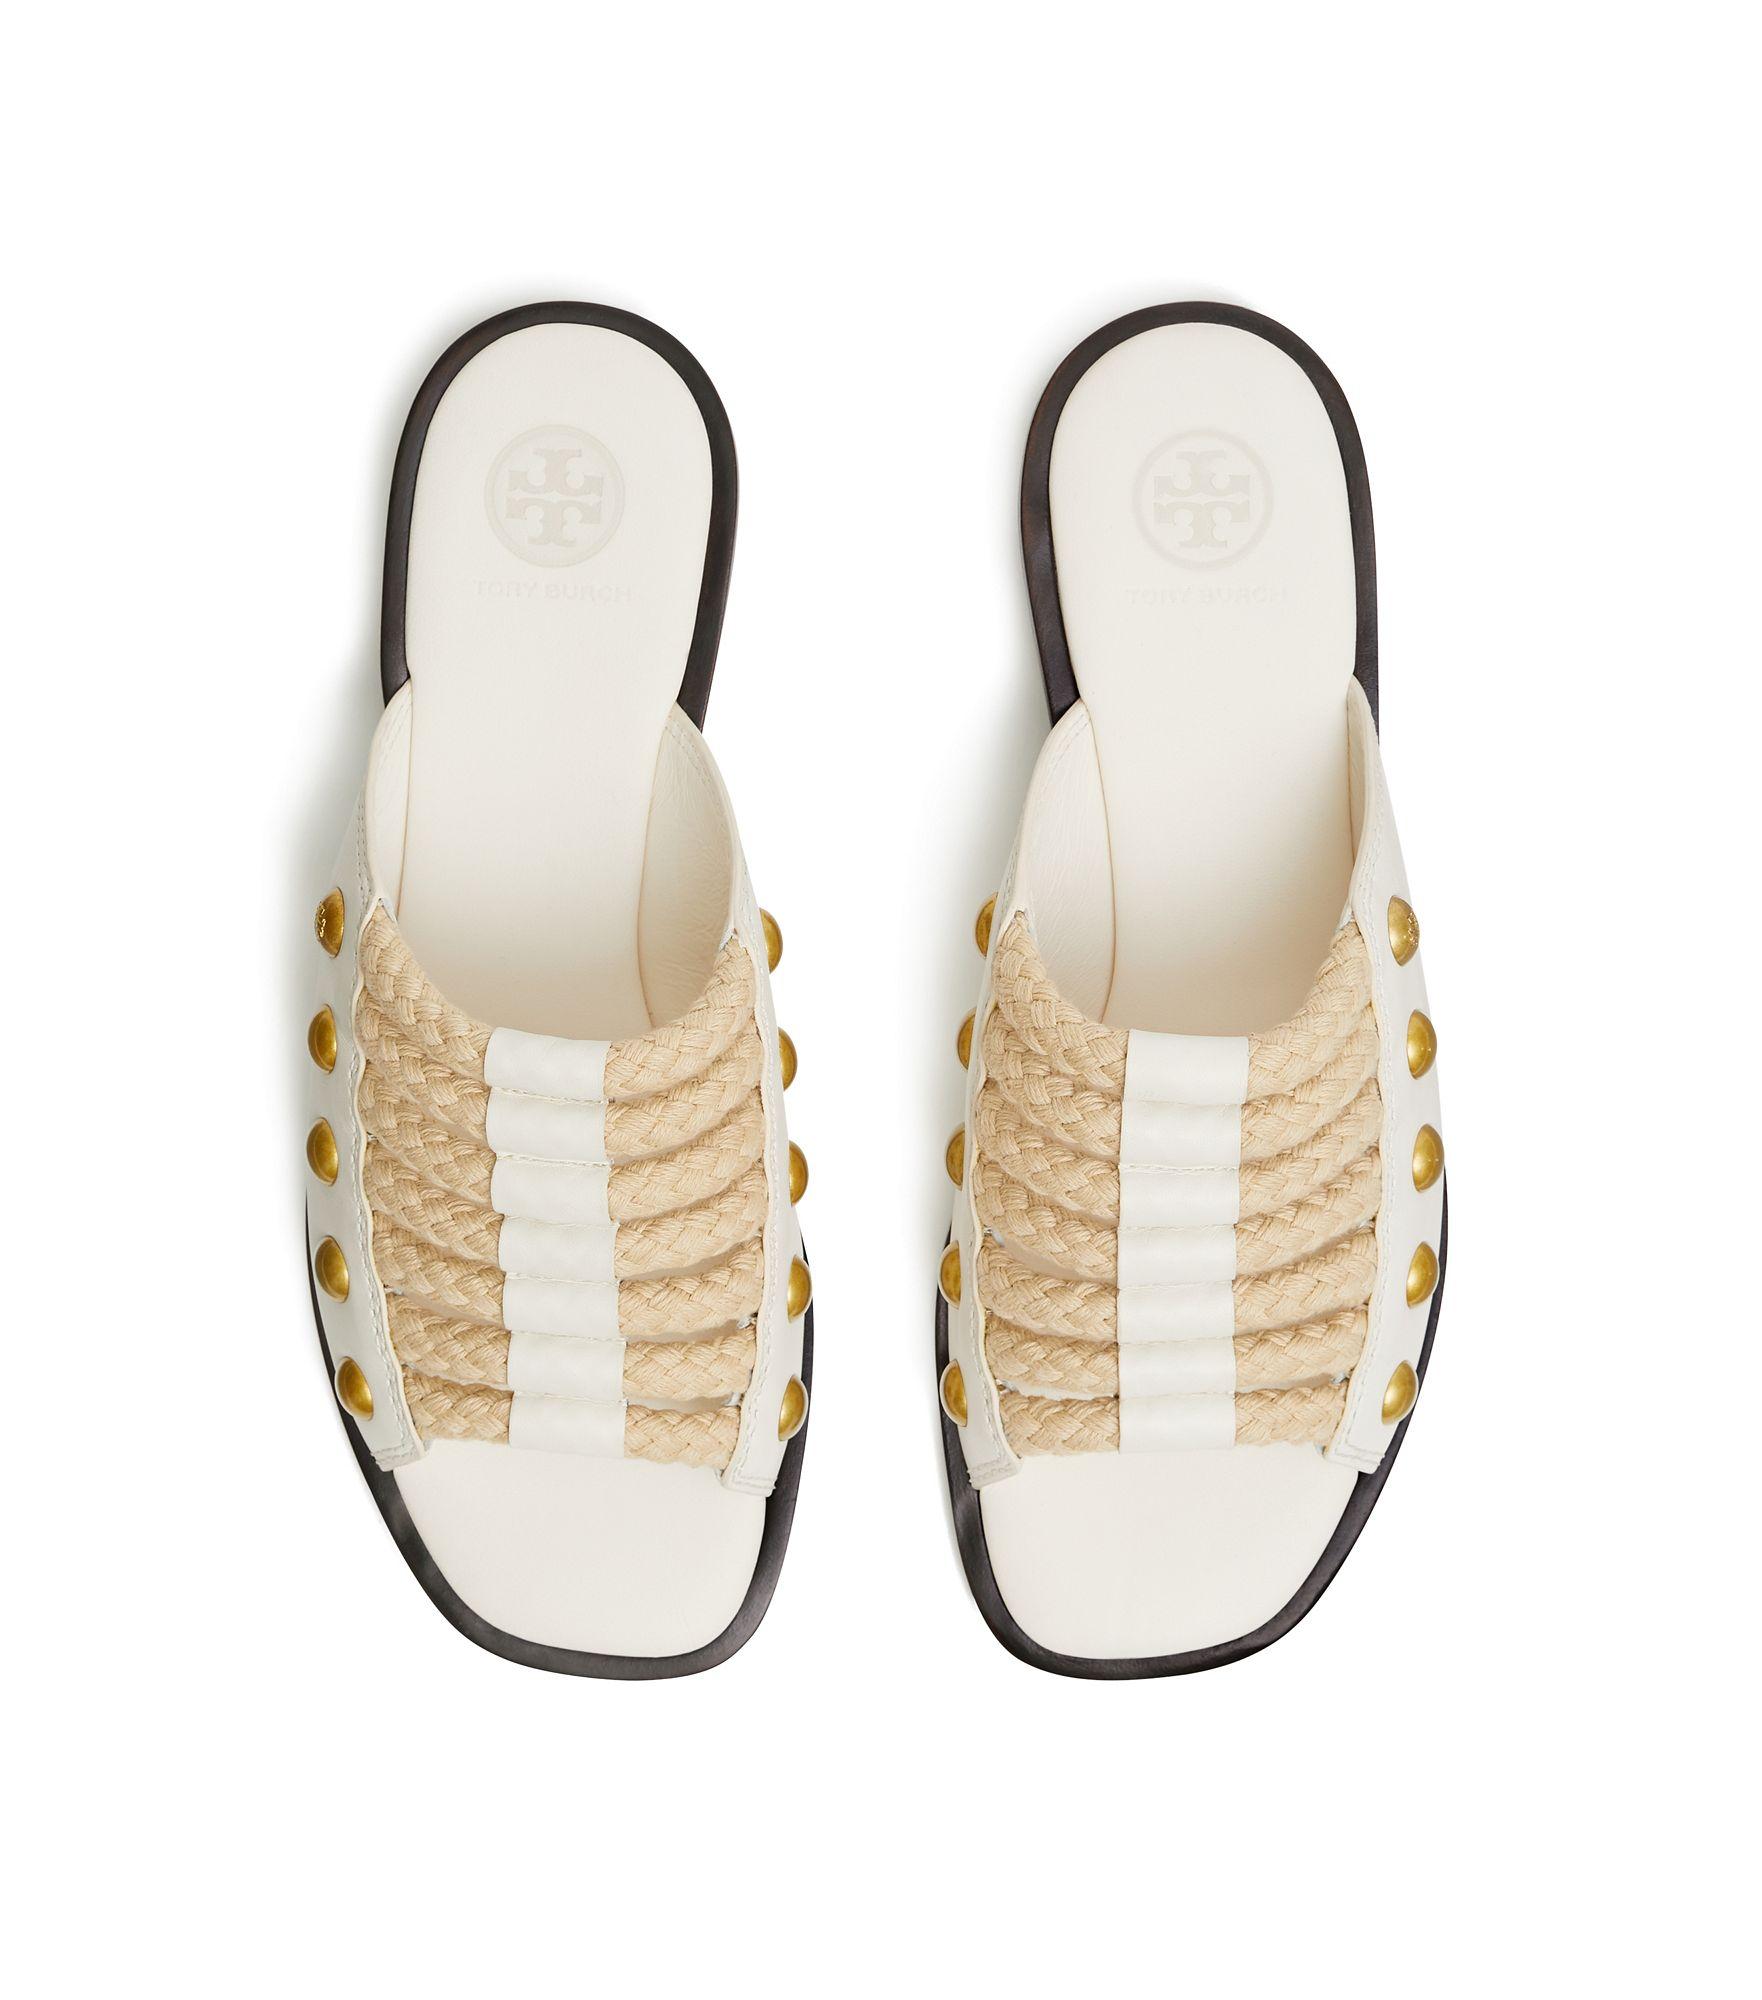 Tory Burch Blythe Rope Sliders in White | Lyst